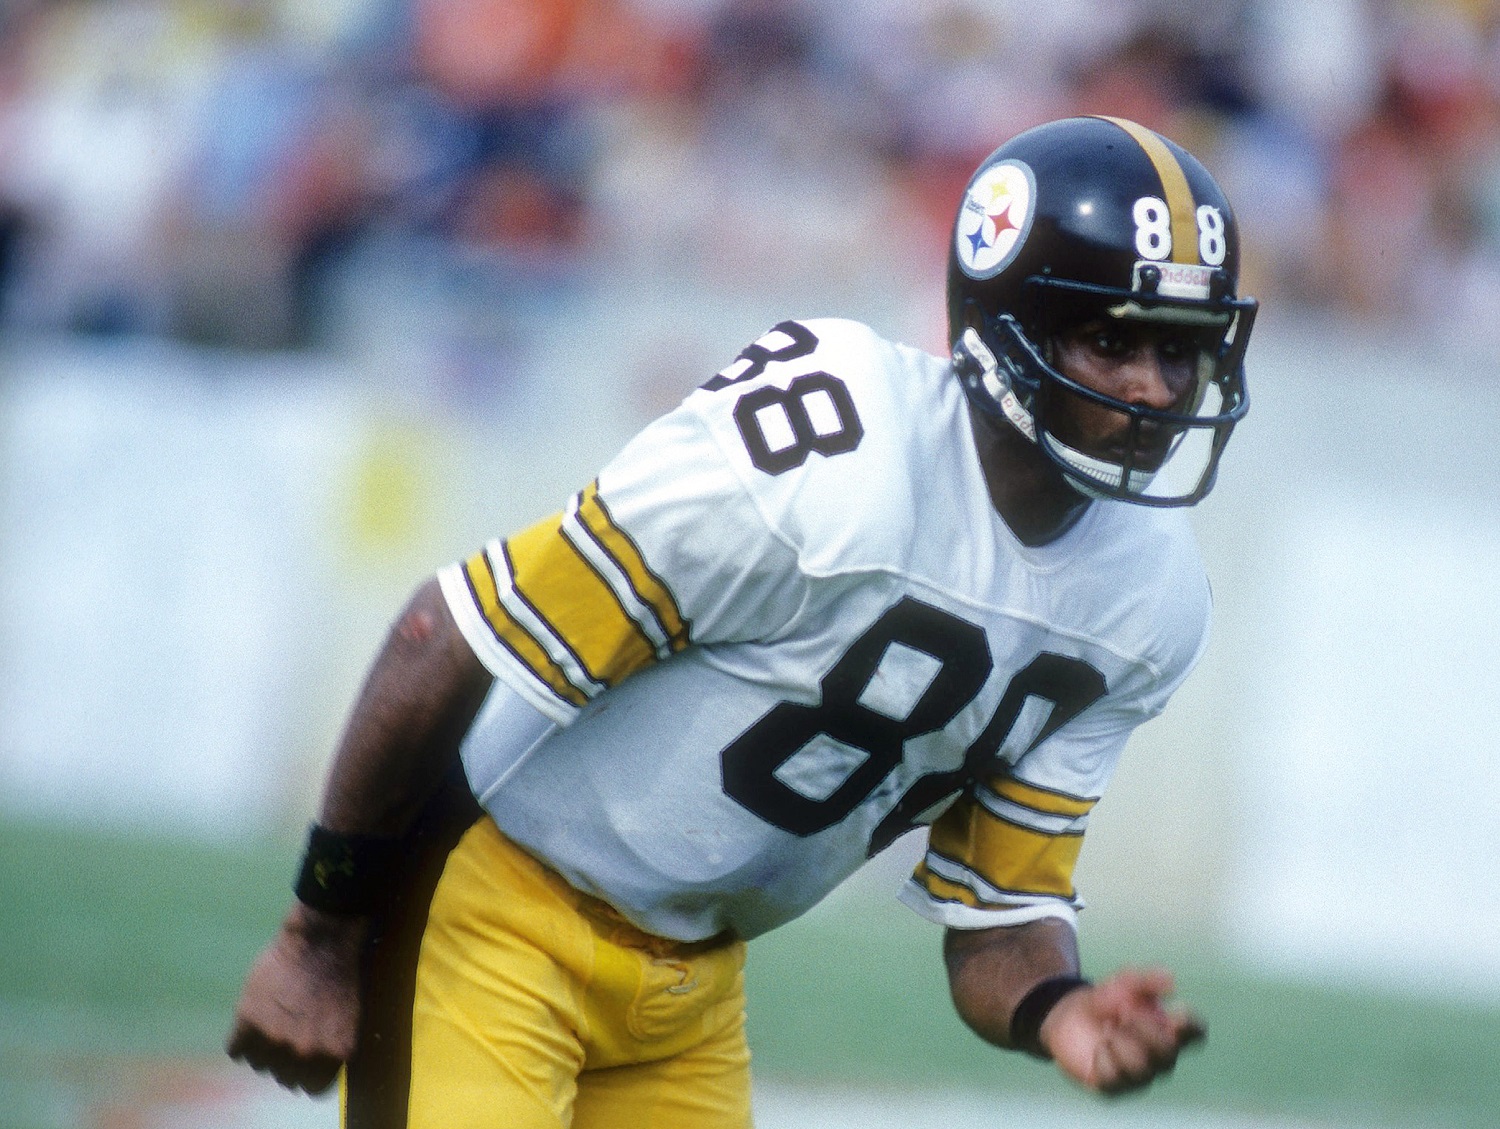 Lynn Swann helped the Pittsburgh Steelers to four Super Bowl victories en route to induction into the Pro Football Hall of Fame